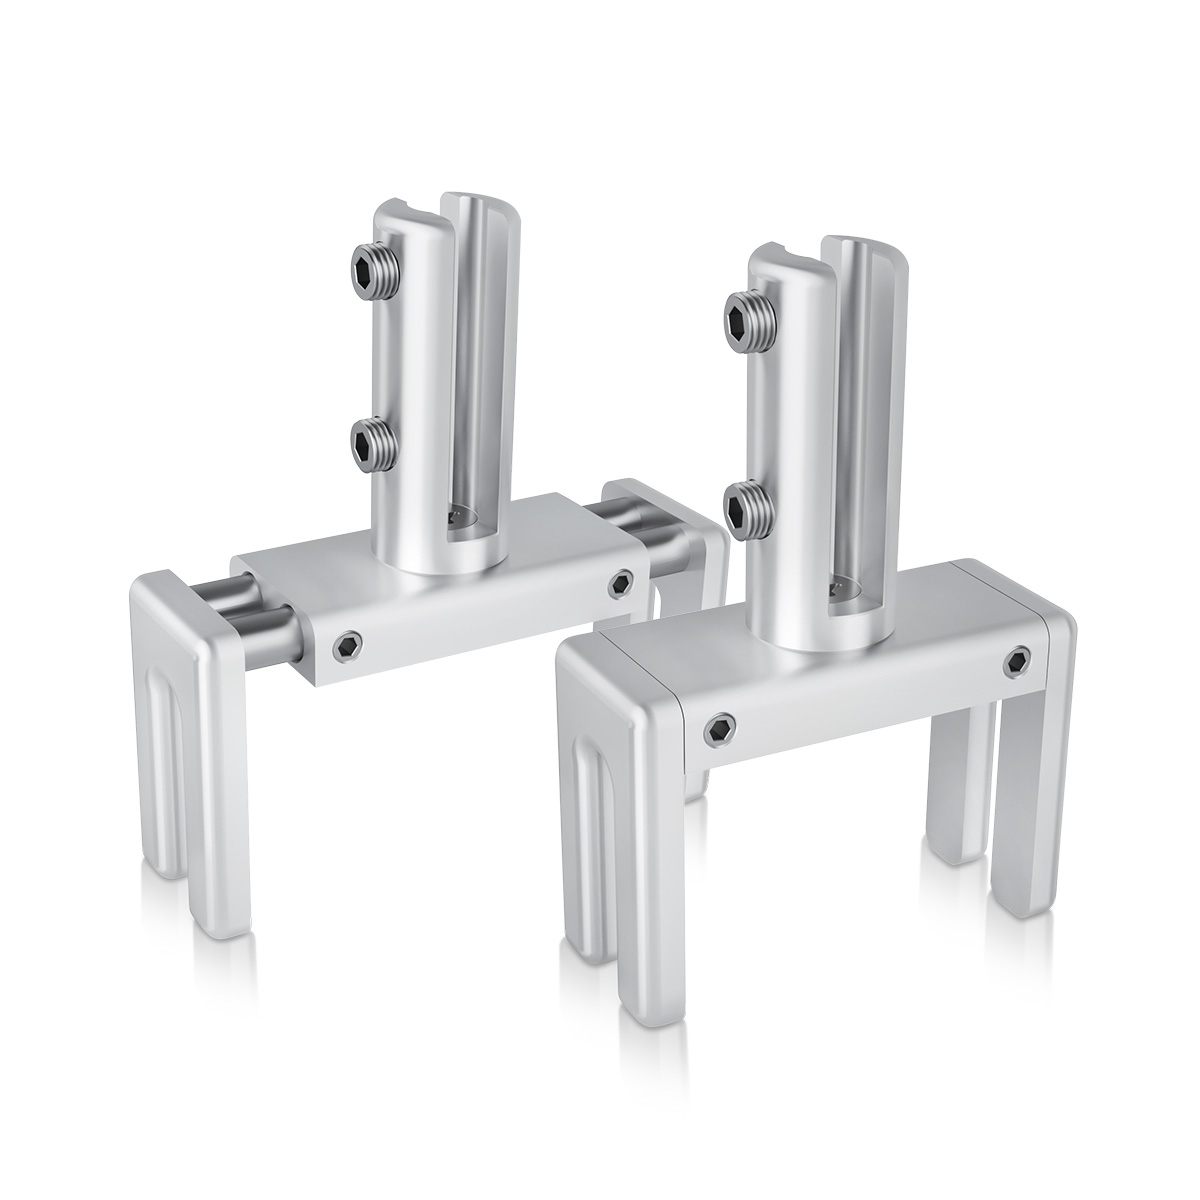 Set of 2, Adjustable Clamp, Aluminum Clear Anodized Finish, to Accommodate 1-3/4'' to 2-3/8'' Cubicle partition. Upt to 1/4'' material accepted on the fork (Included 4x 1'' and 4x 2'' bolt sur adjust clamp)